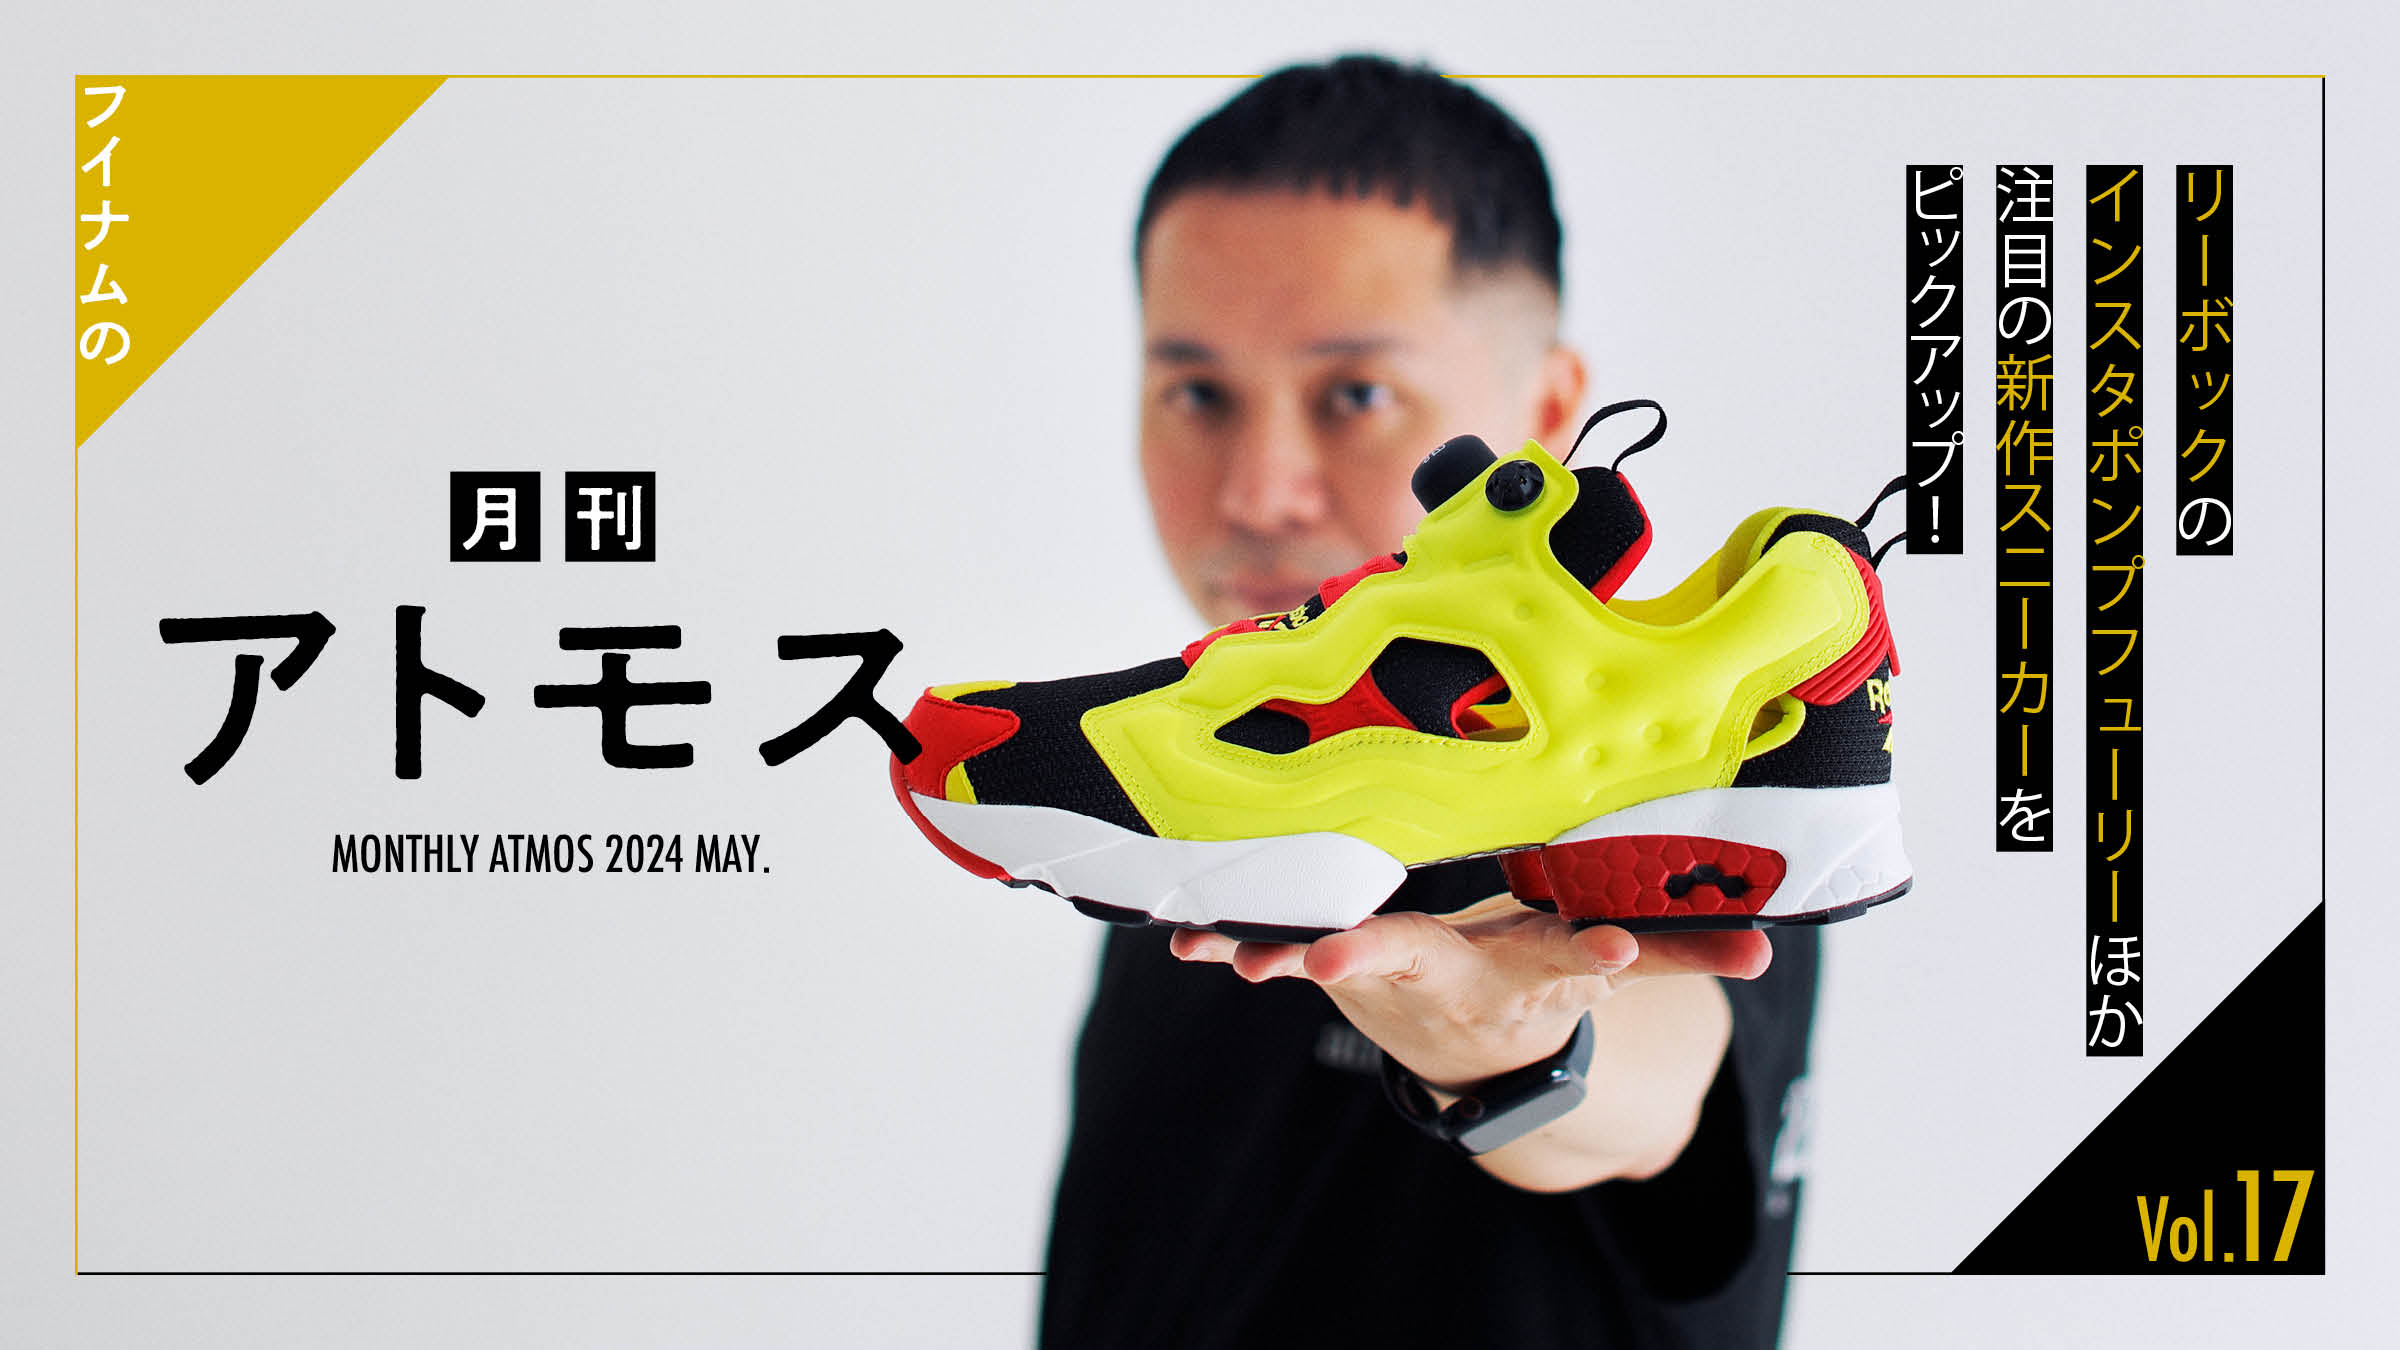 HOUYHNHNM's "Monthly ATMOS" Vol. 17 picks up Reebok's Instapump Fury and other hot new sneakers!